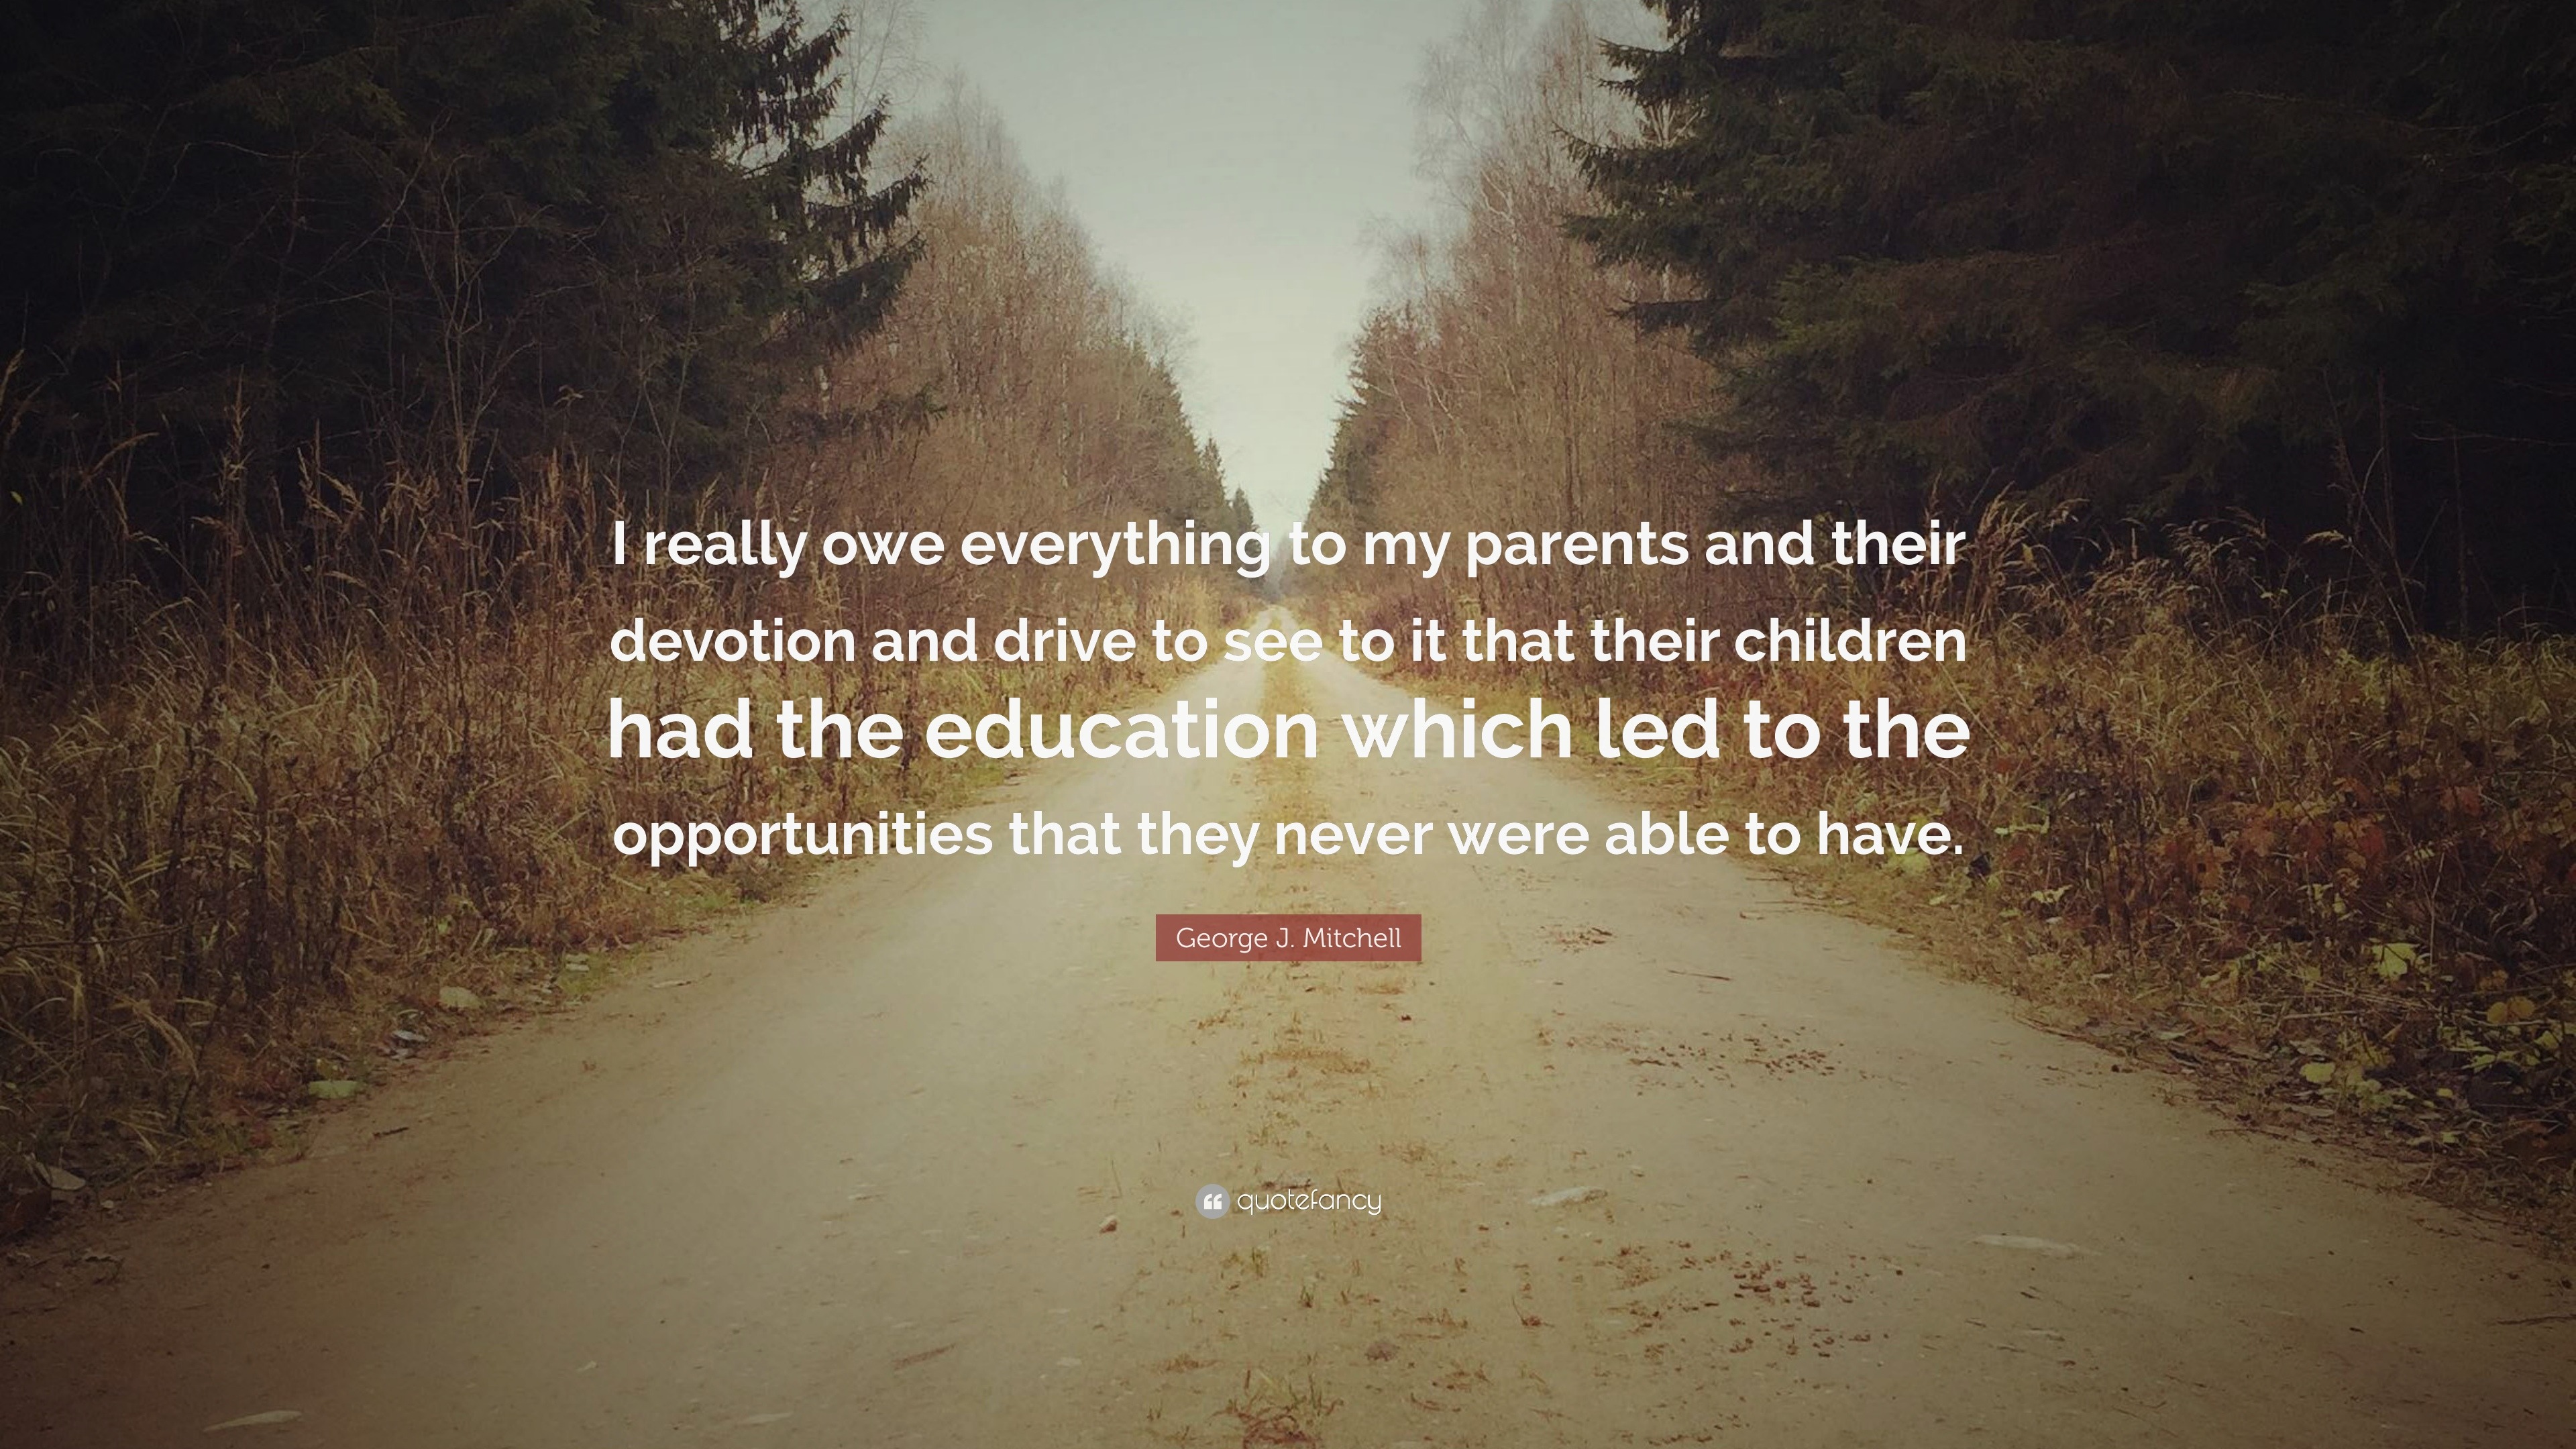 George J. Mitchell Quote: “I really owe everything to my parents and ...